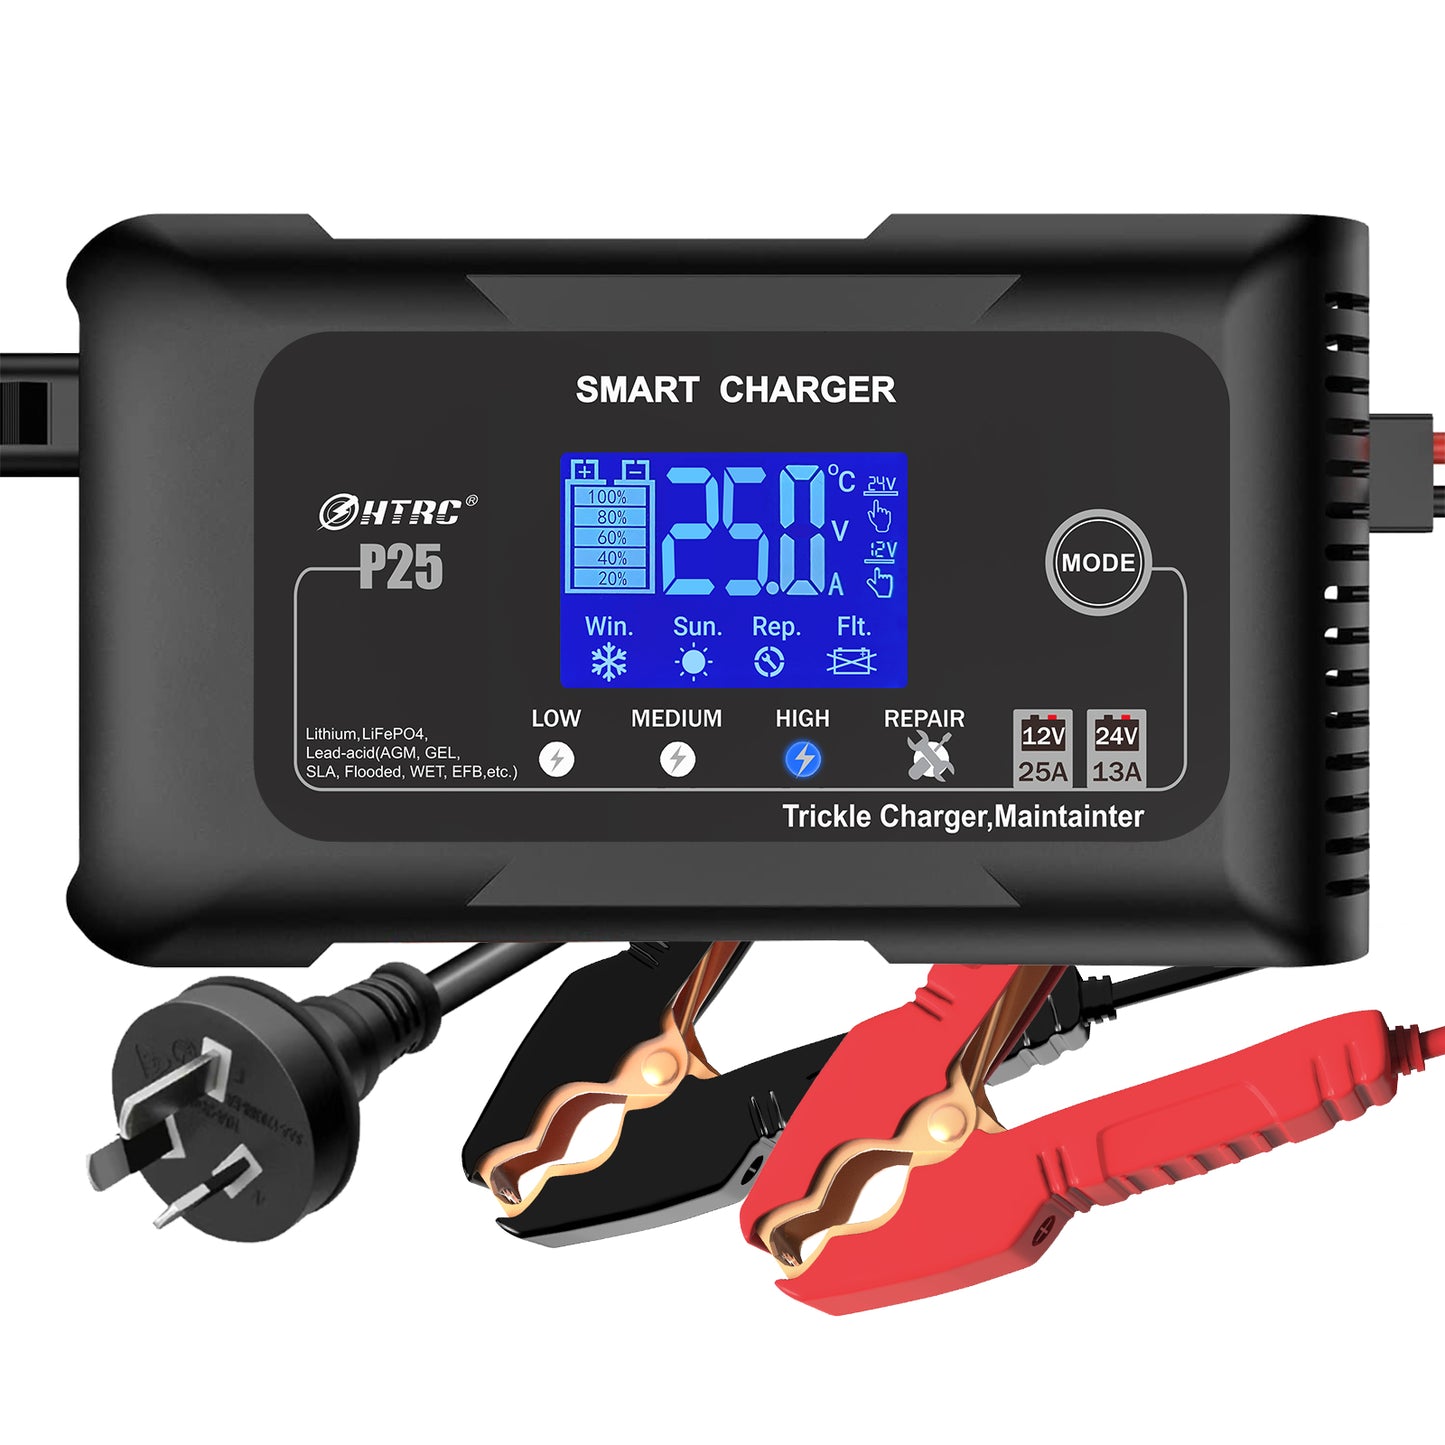 12V Battery Charger, 14.6V 20A Lithium,LiFePO4,Lead-Acid(AGM/Gel/SLA..) Car  Battery Charger,Trickle Charger, Maintainer/deep Cycle Charger,12V/20A for